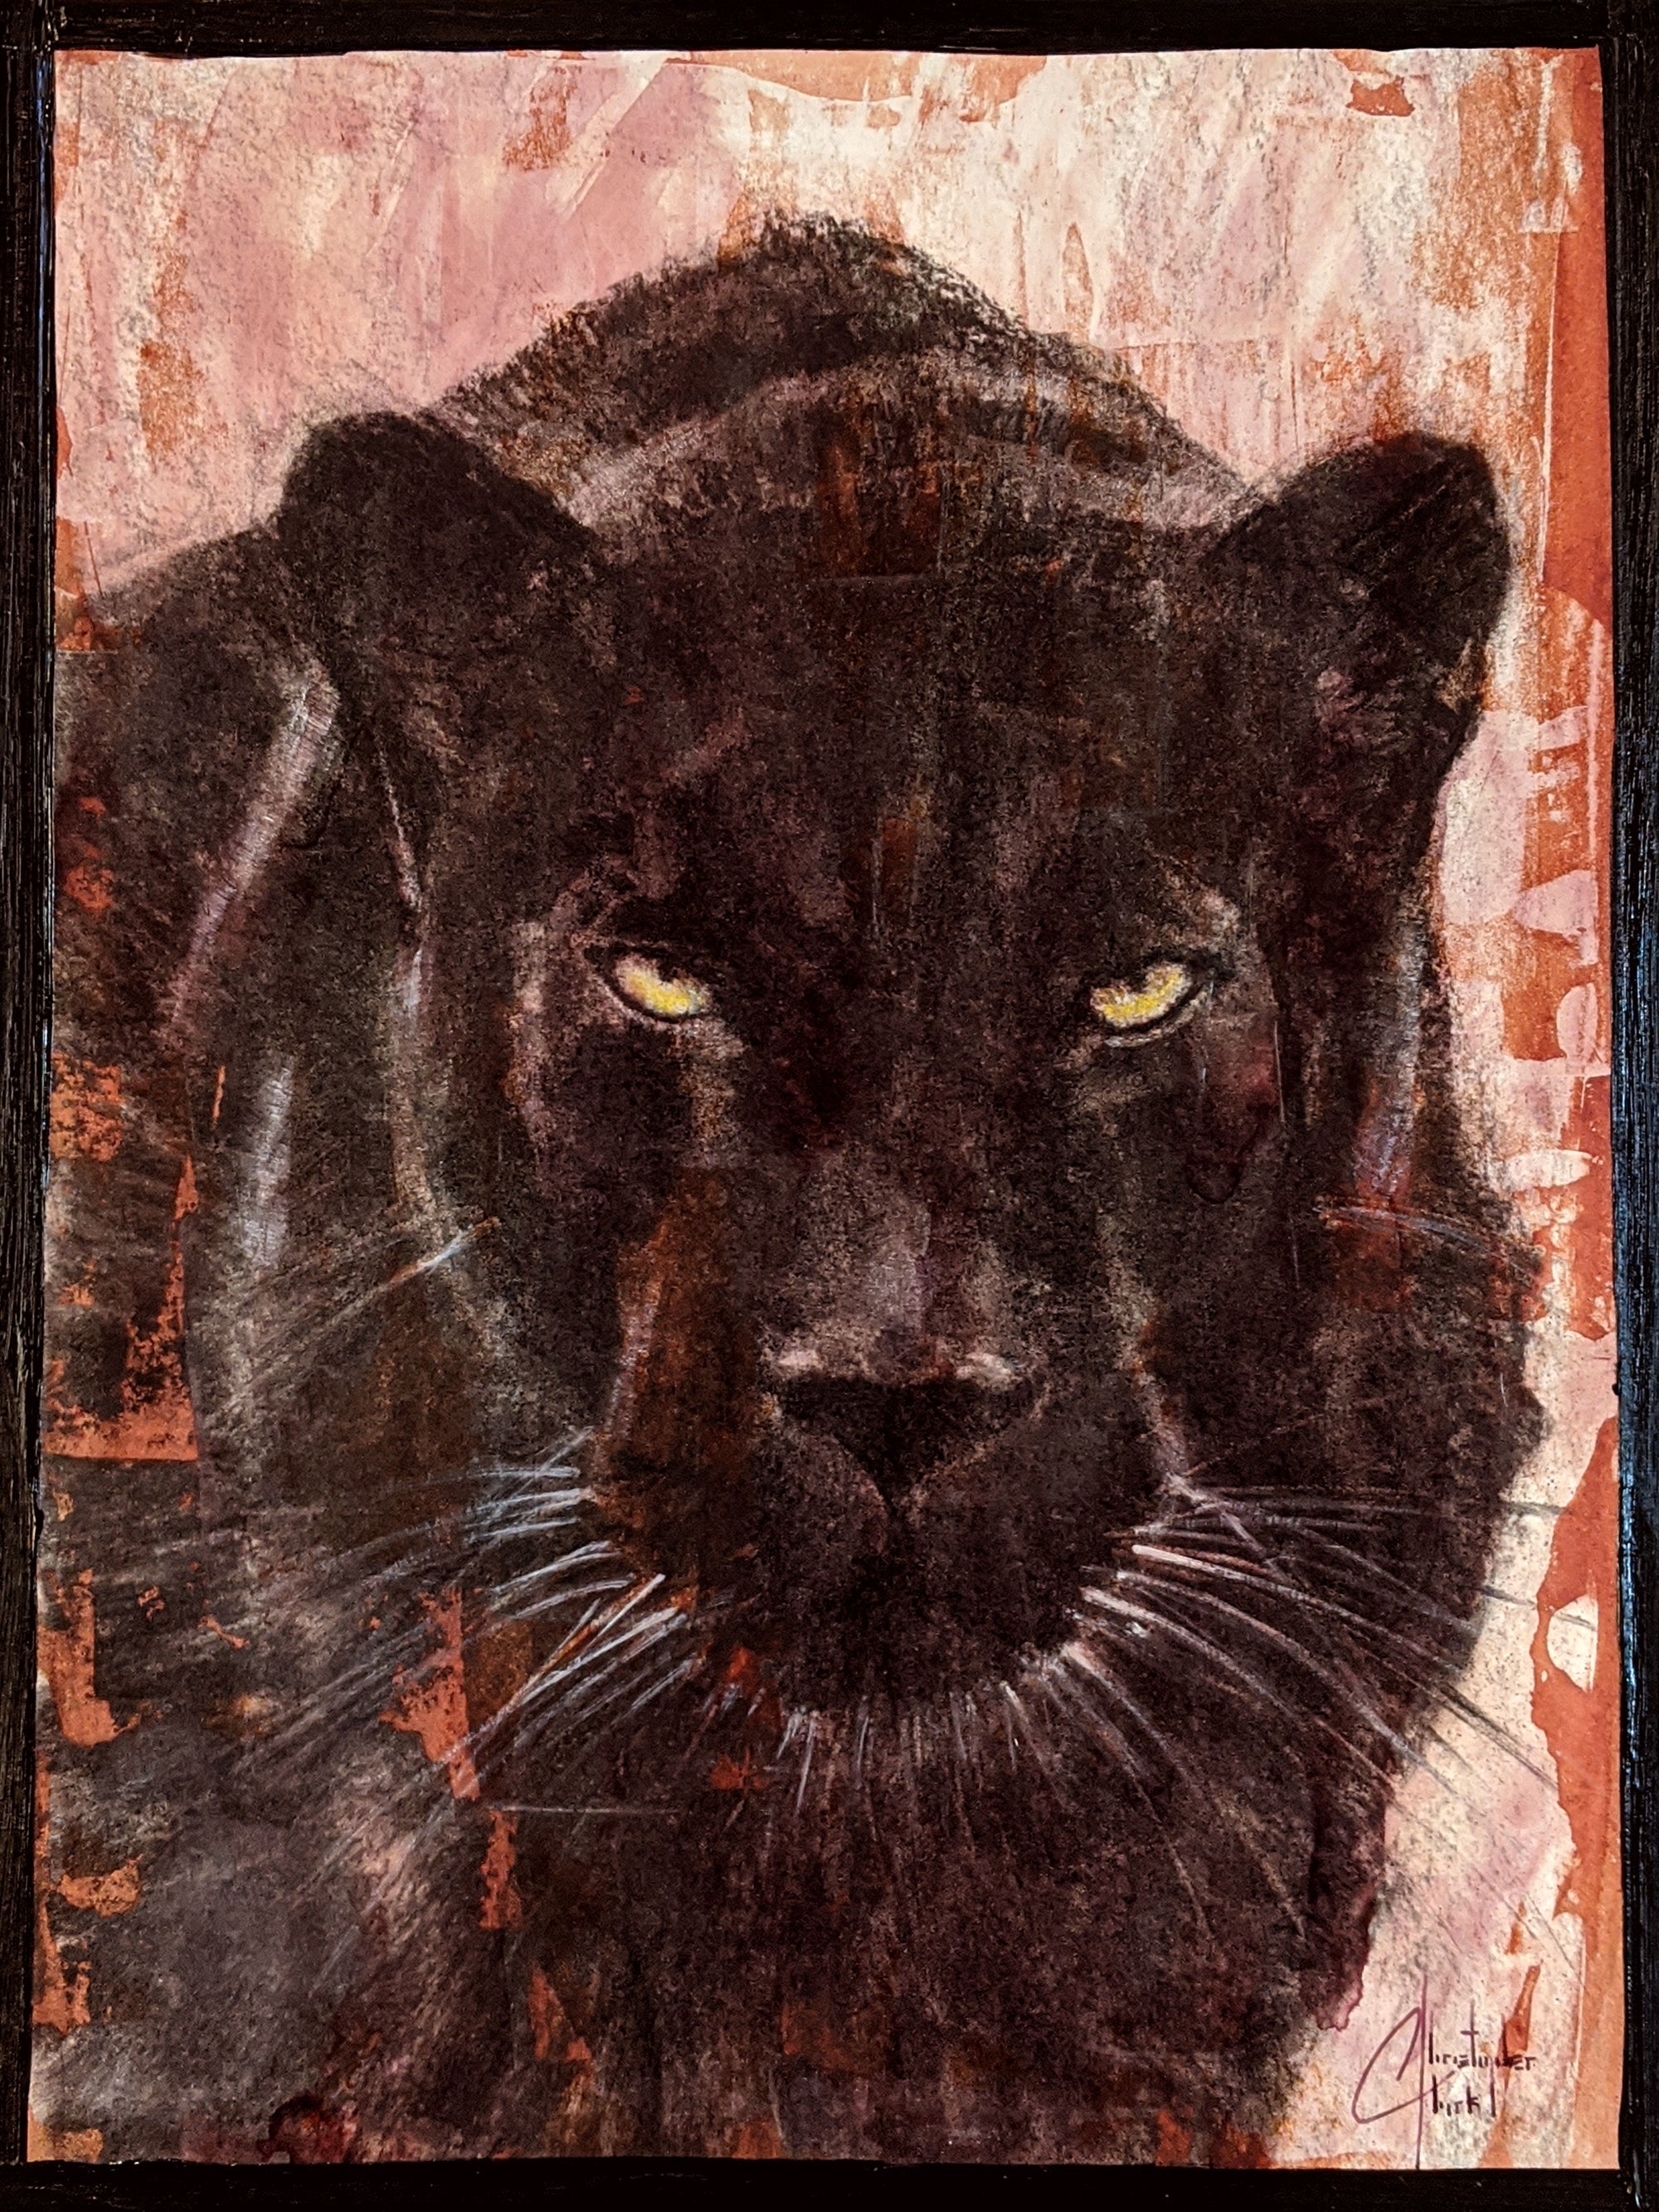 SOLD - Original "Black Panther" charcoal, ink & watercolor on paper 12"x9" by Christopher Clark